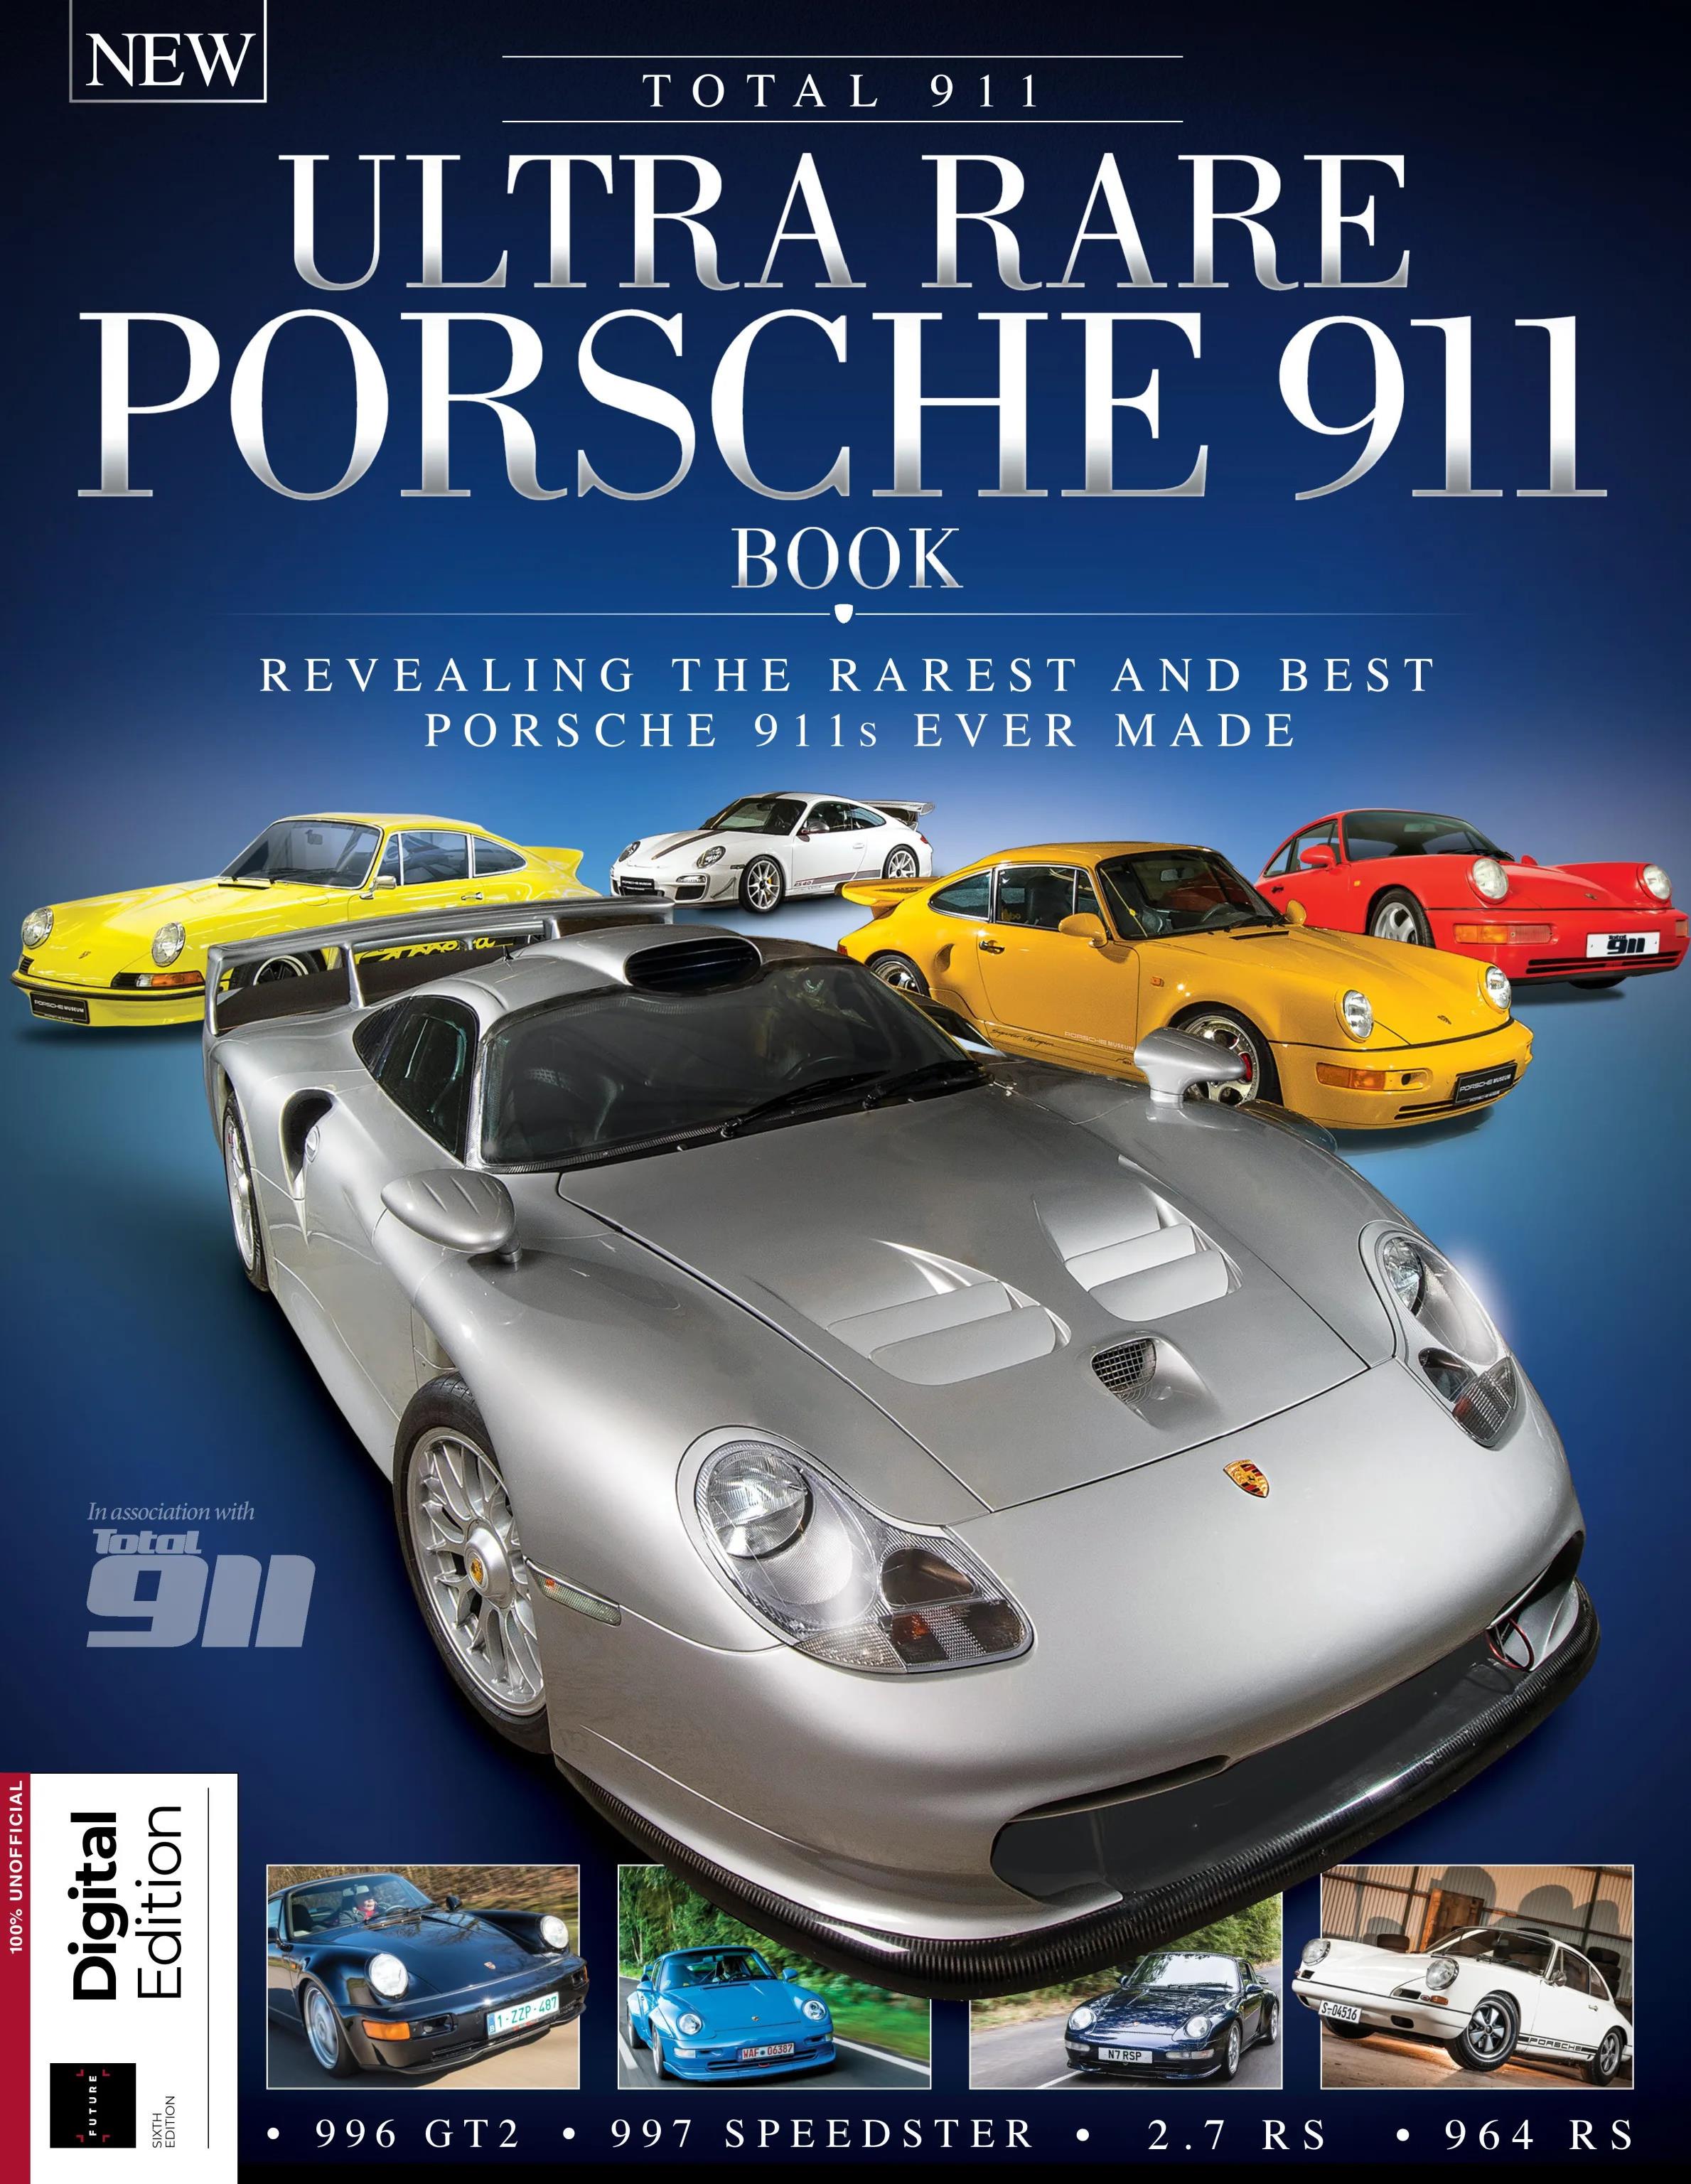 Журнал Ultra Rare Porsche 911 Book - Sixth Edition.(from the publishers of Total 911)